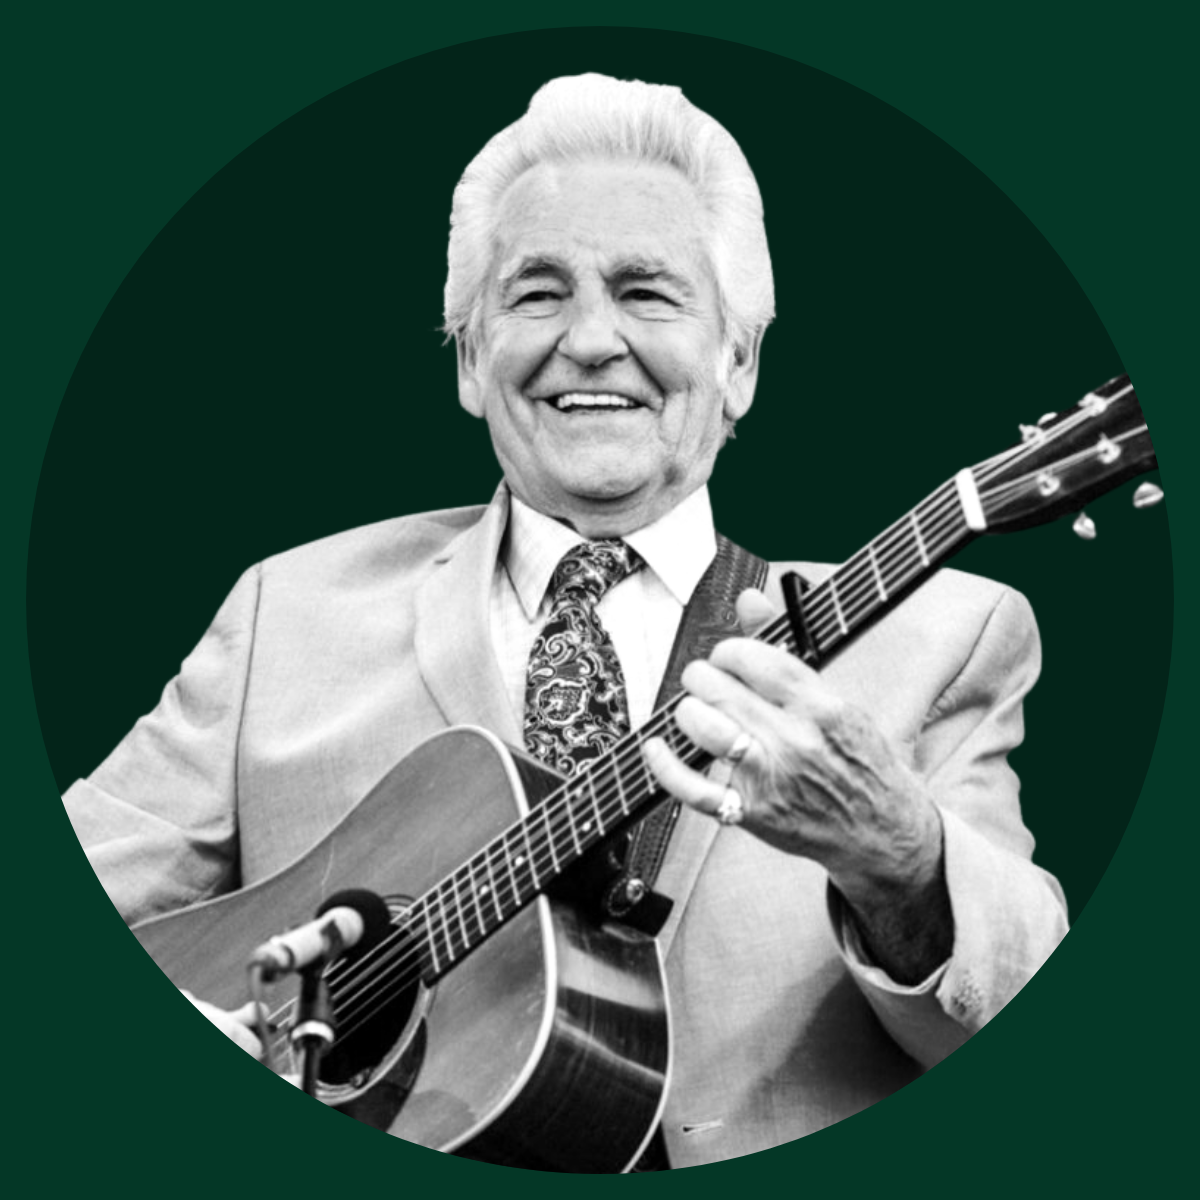 That Ain't Bluegrass: The Del McCoury Band